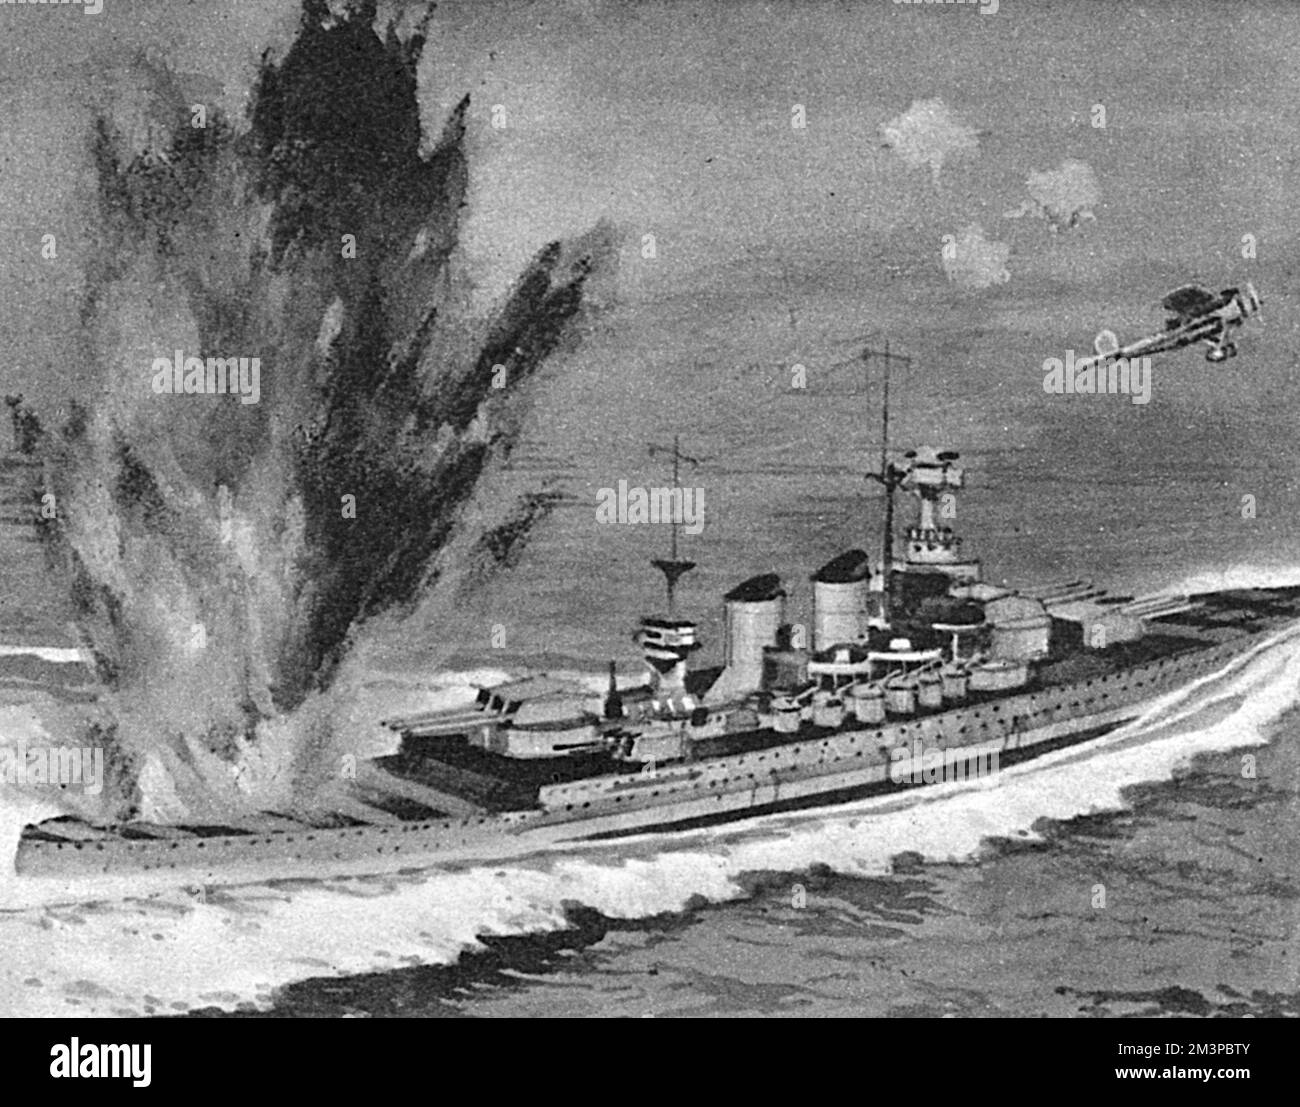 At 11.30am The Italian battleship, the Vittorio Veneto, is attacked by British Fairey Albacore torpedo bombers, launched from the aircraft carrier H.M.S. Formidable     Date: 28 March 1941 Stock Photo